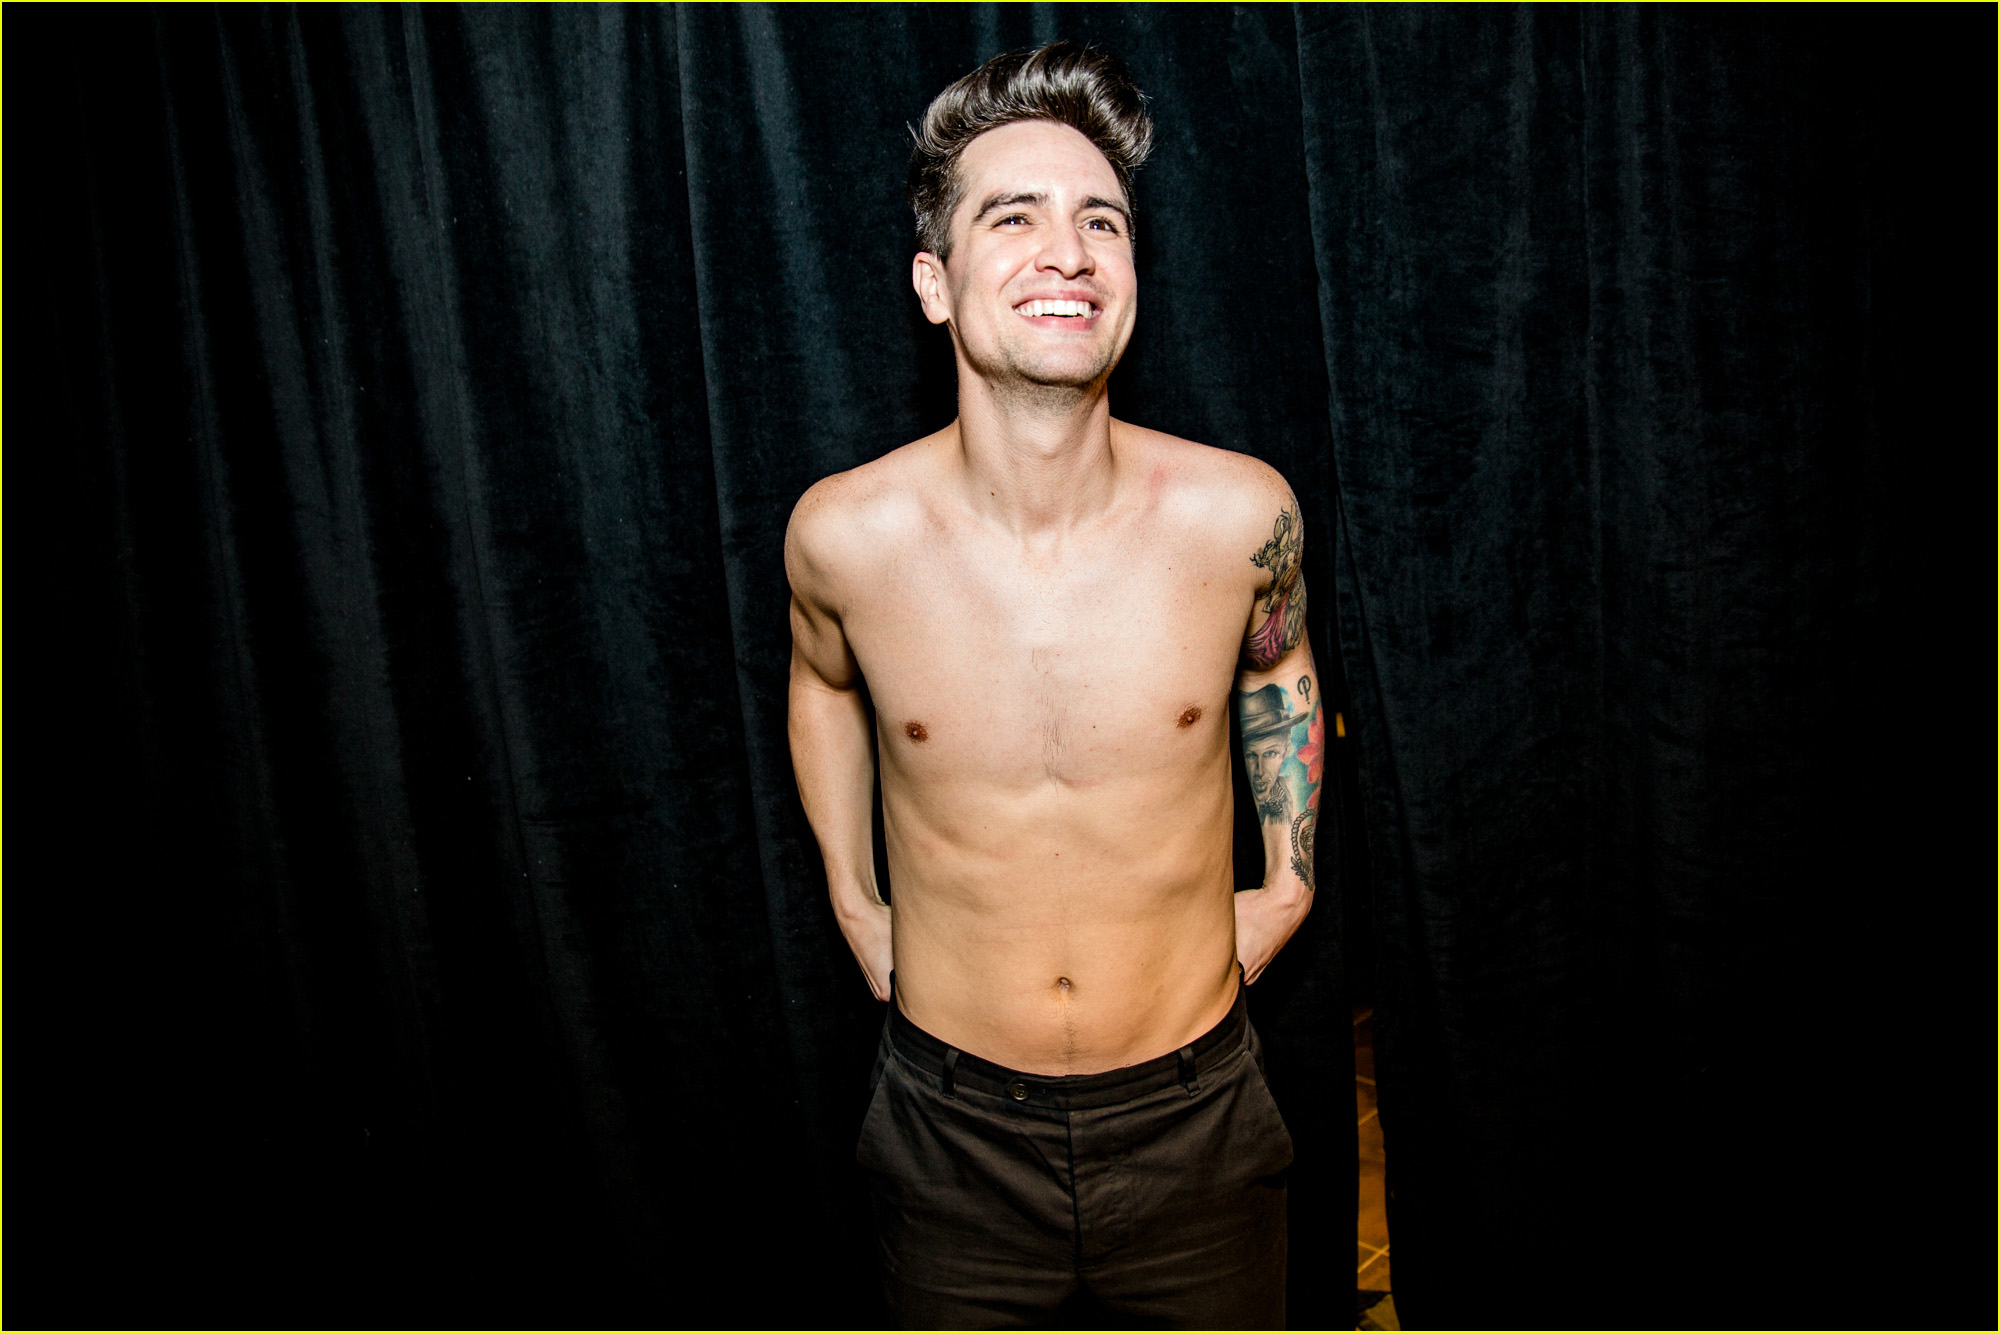 brendon urie looks so hot going shirtless backstage at iheartradio